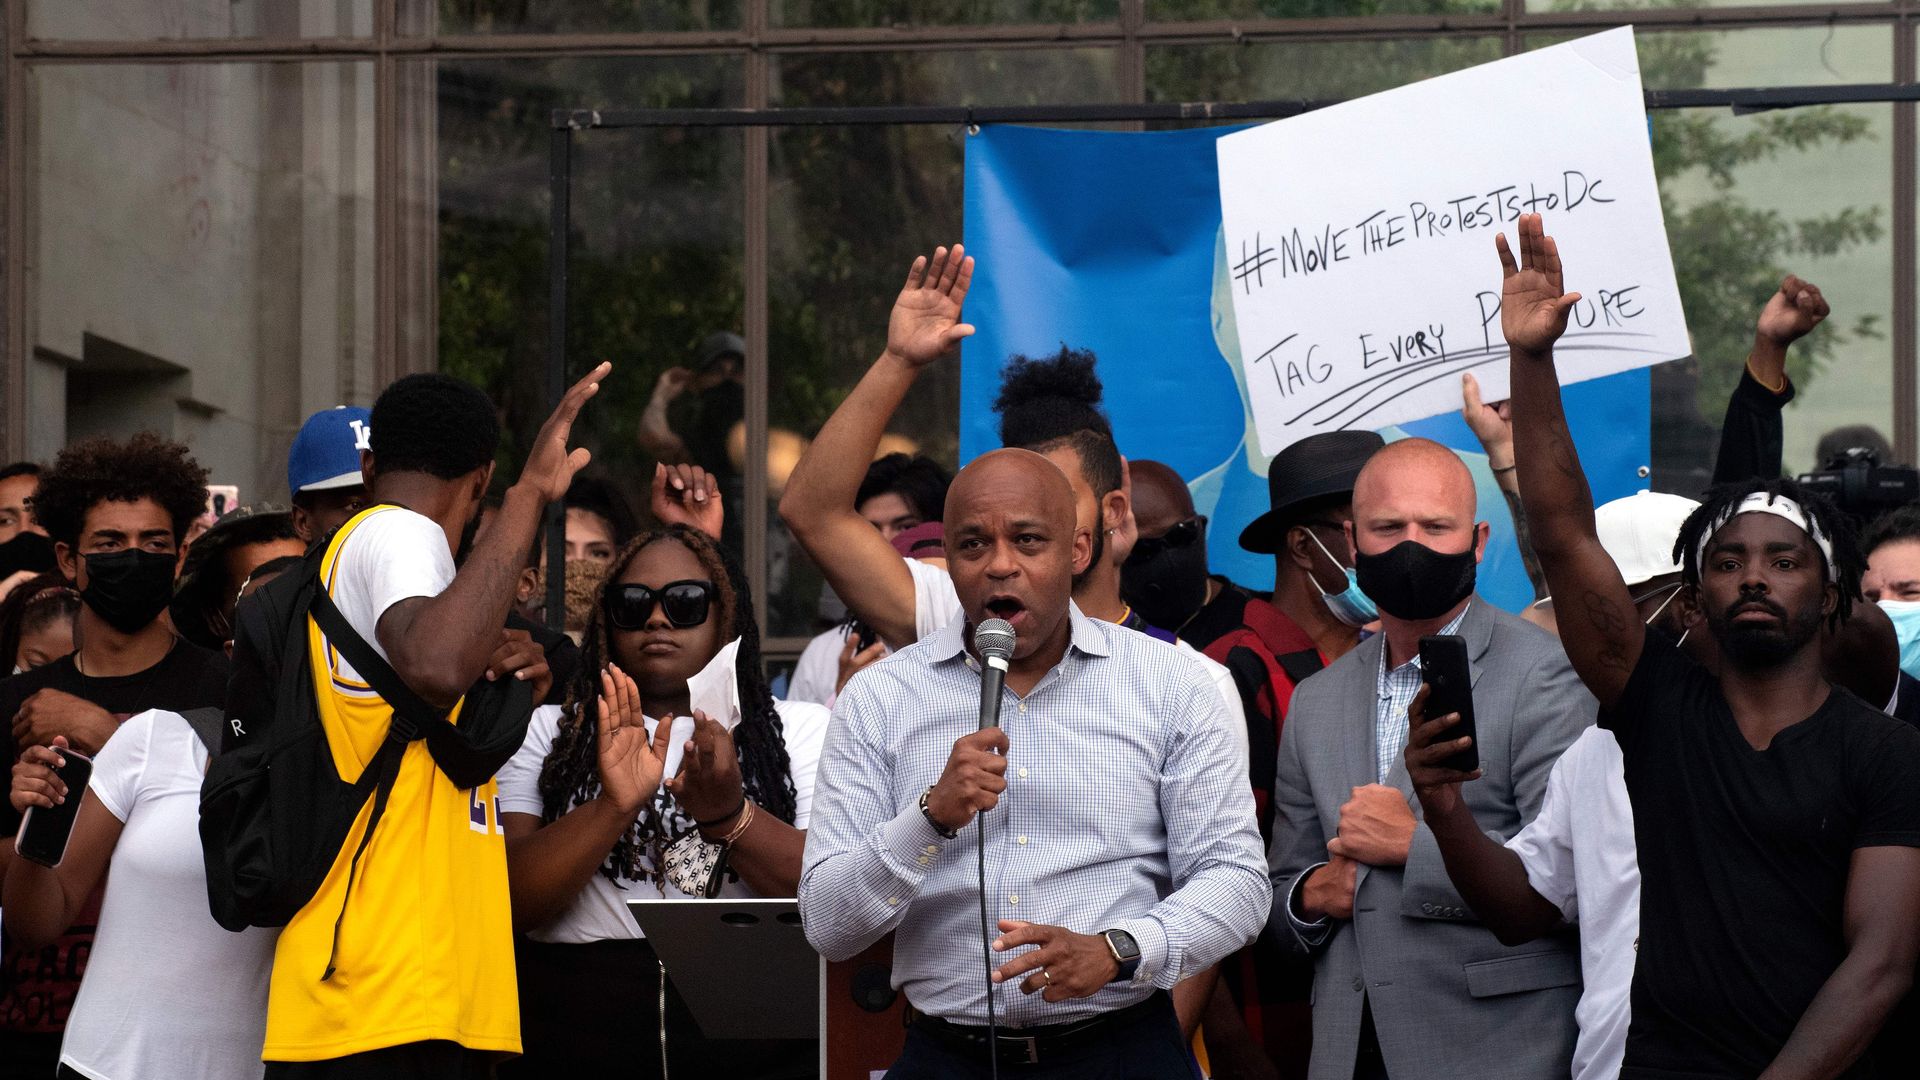 A photo of Mayor Michael Hancock speaking on a stage at a Black Lives Matter rally